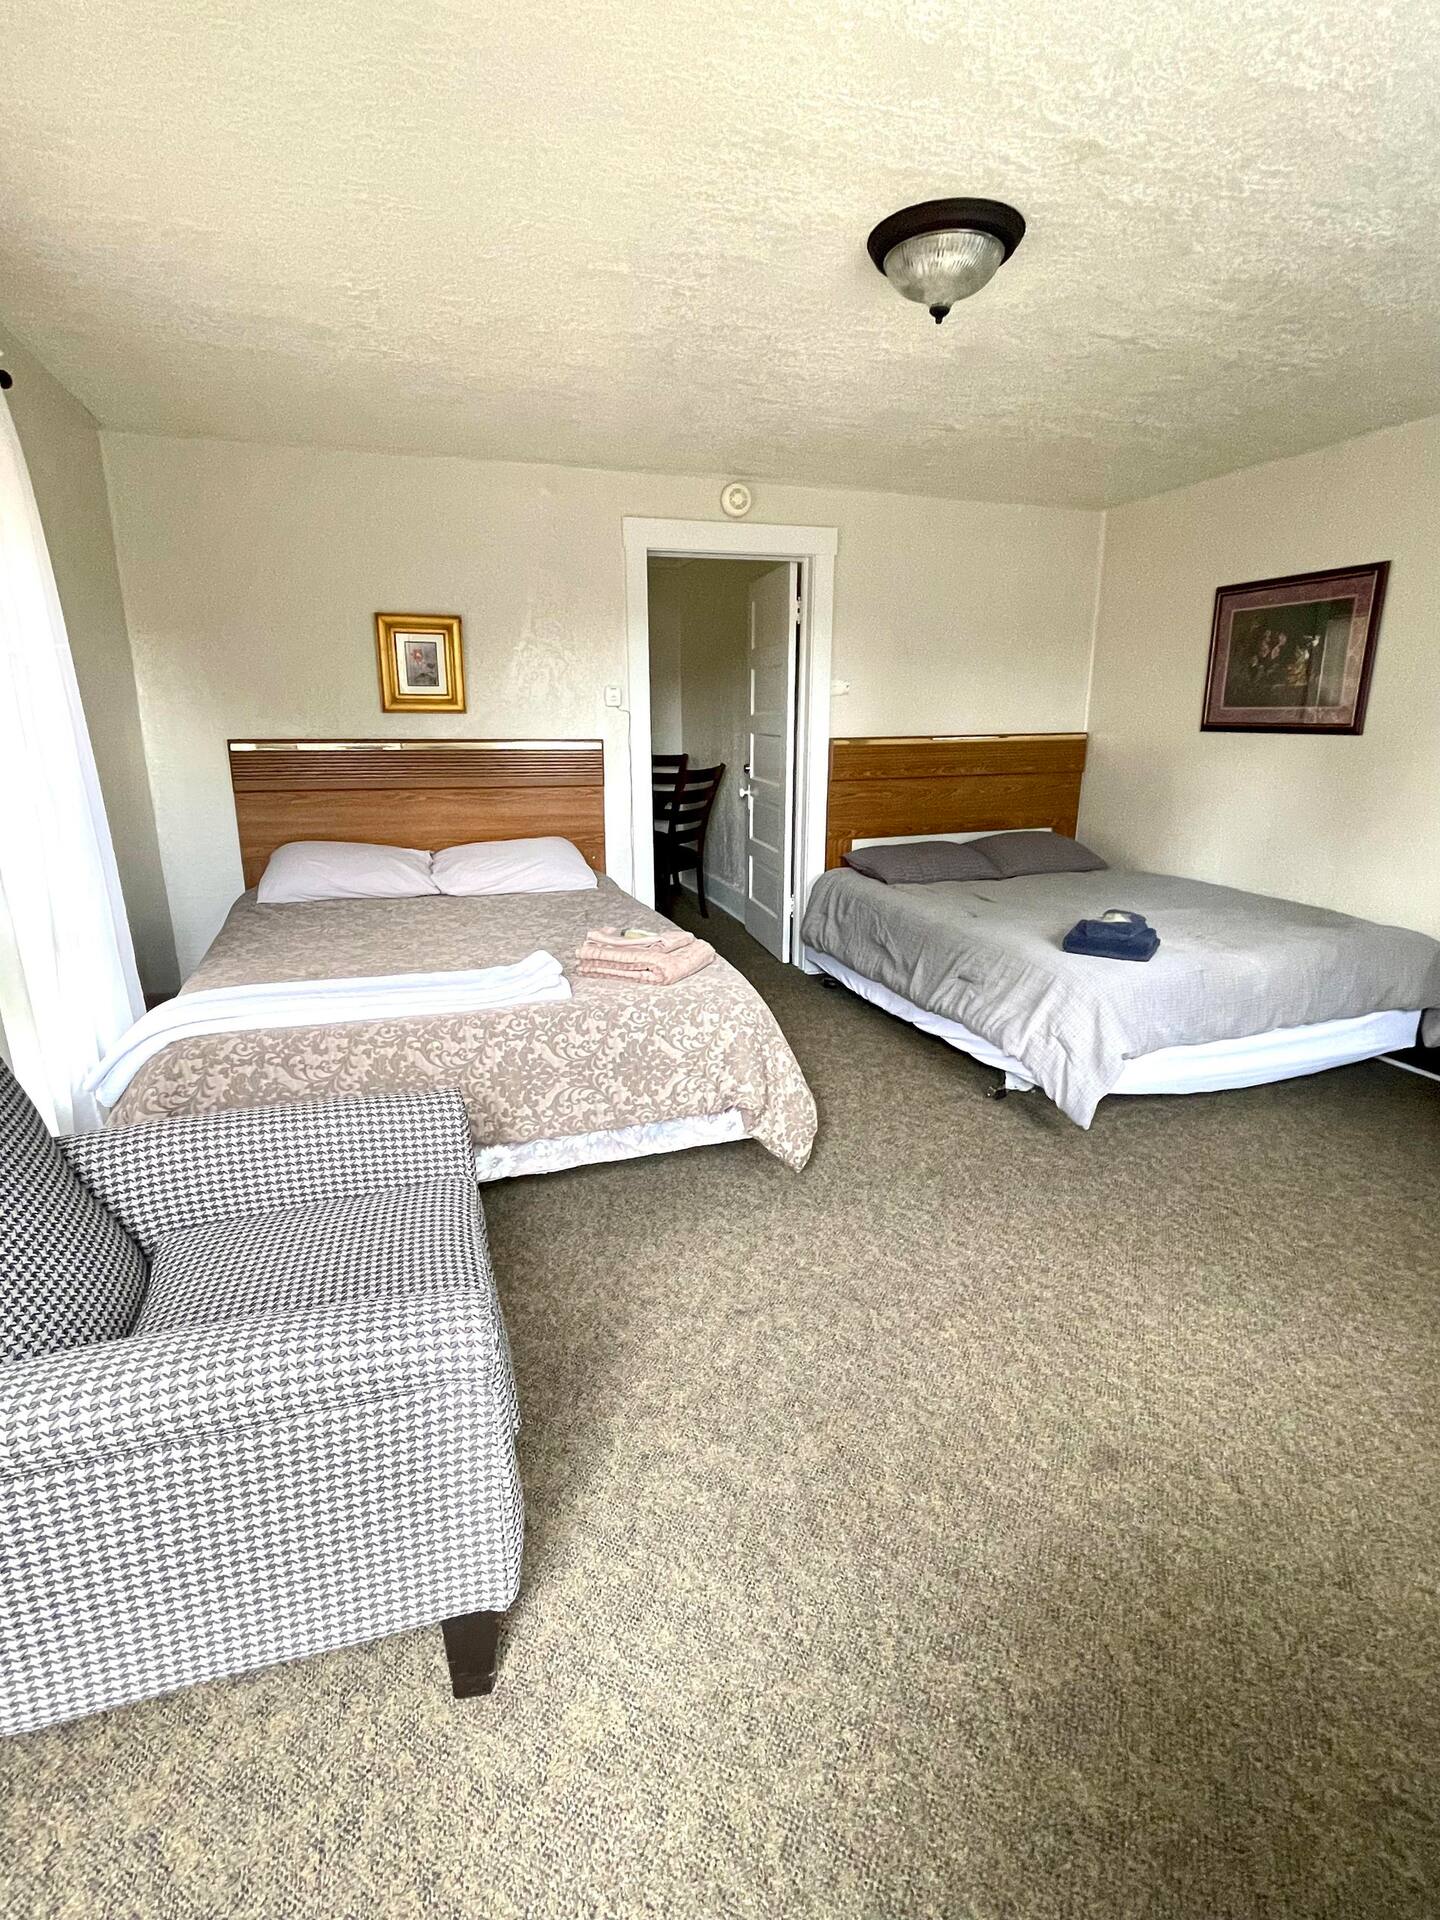 The Sundance Inn – Suite #4- Spacious Studio Suite with Kitchenette in Roy, NM.